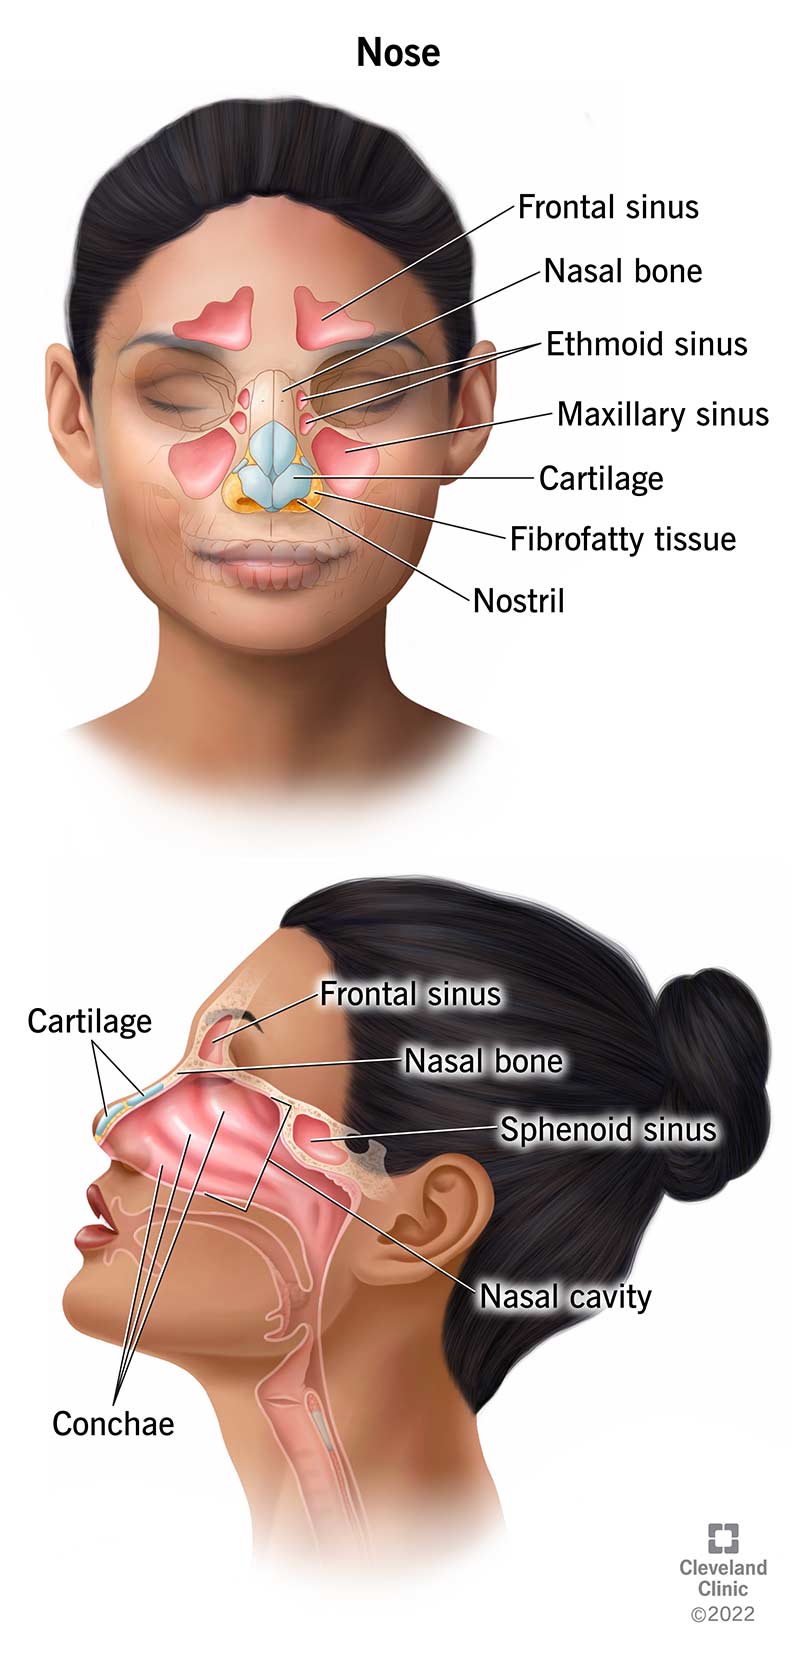 Diagram shows anatomy of a person's nose from the front and side views.